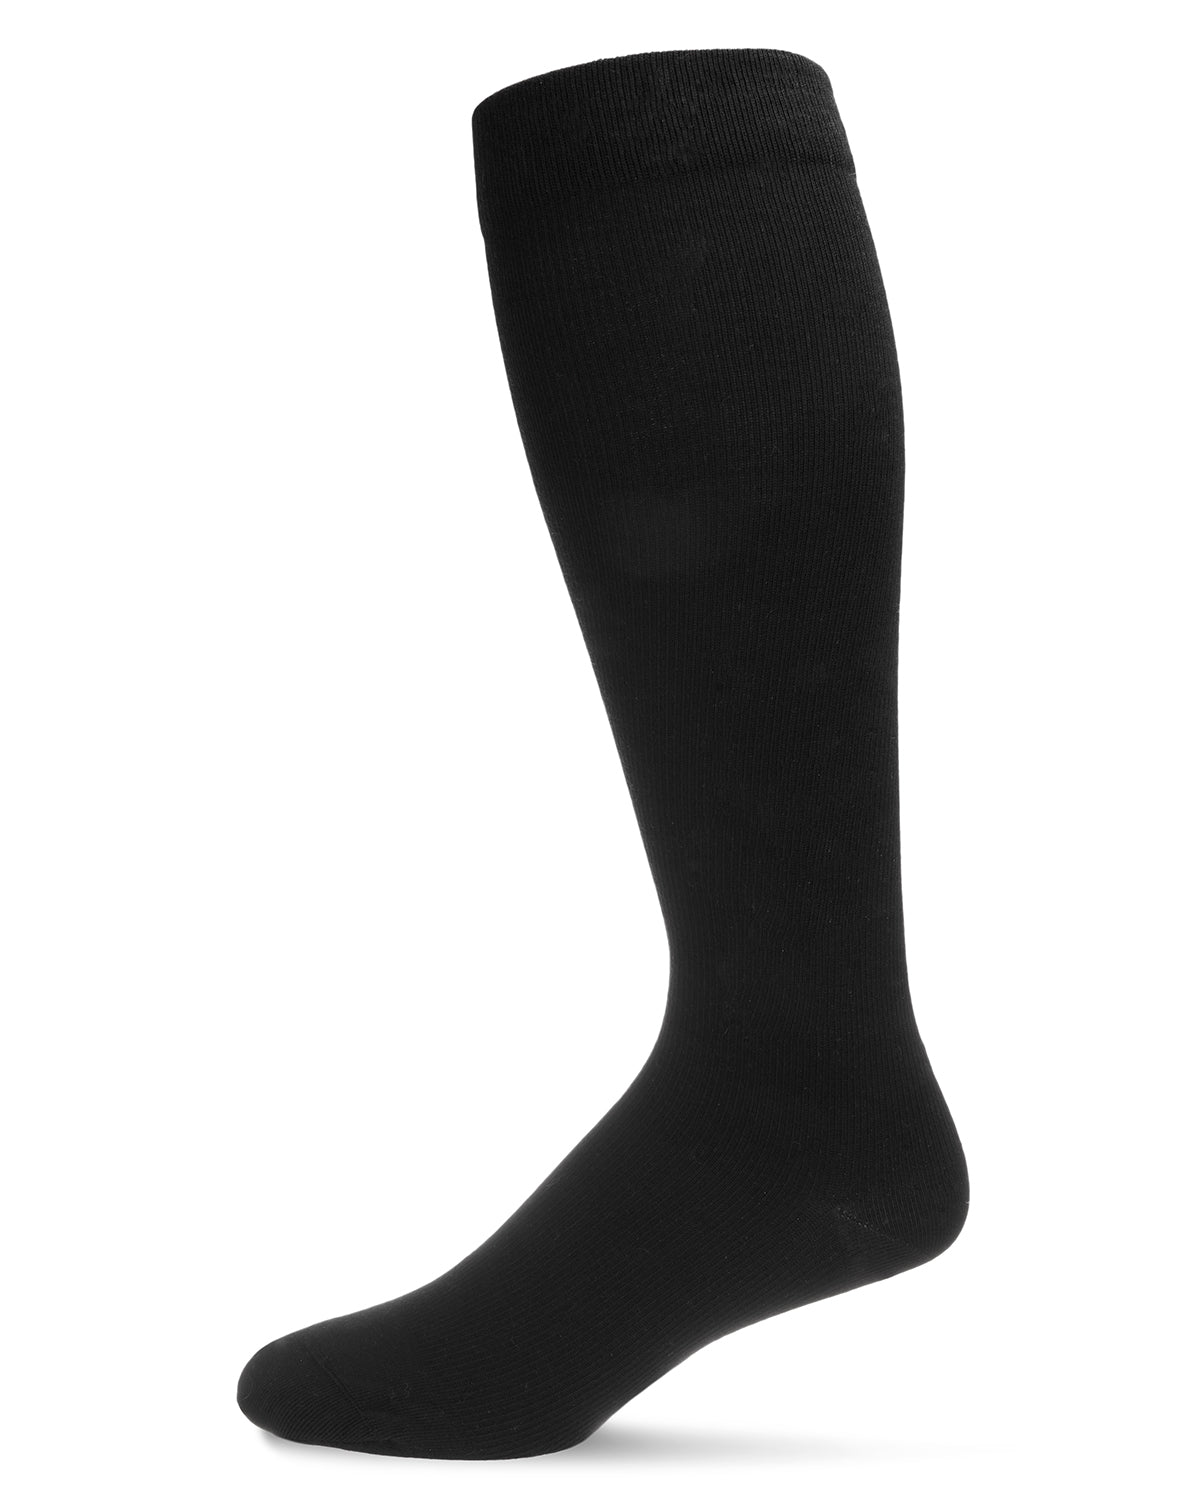 2 Pair Solid Cotton Blend Graduated Compression Socks